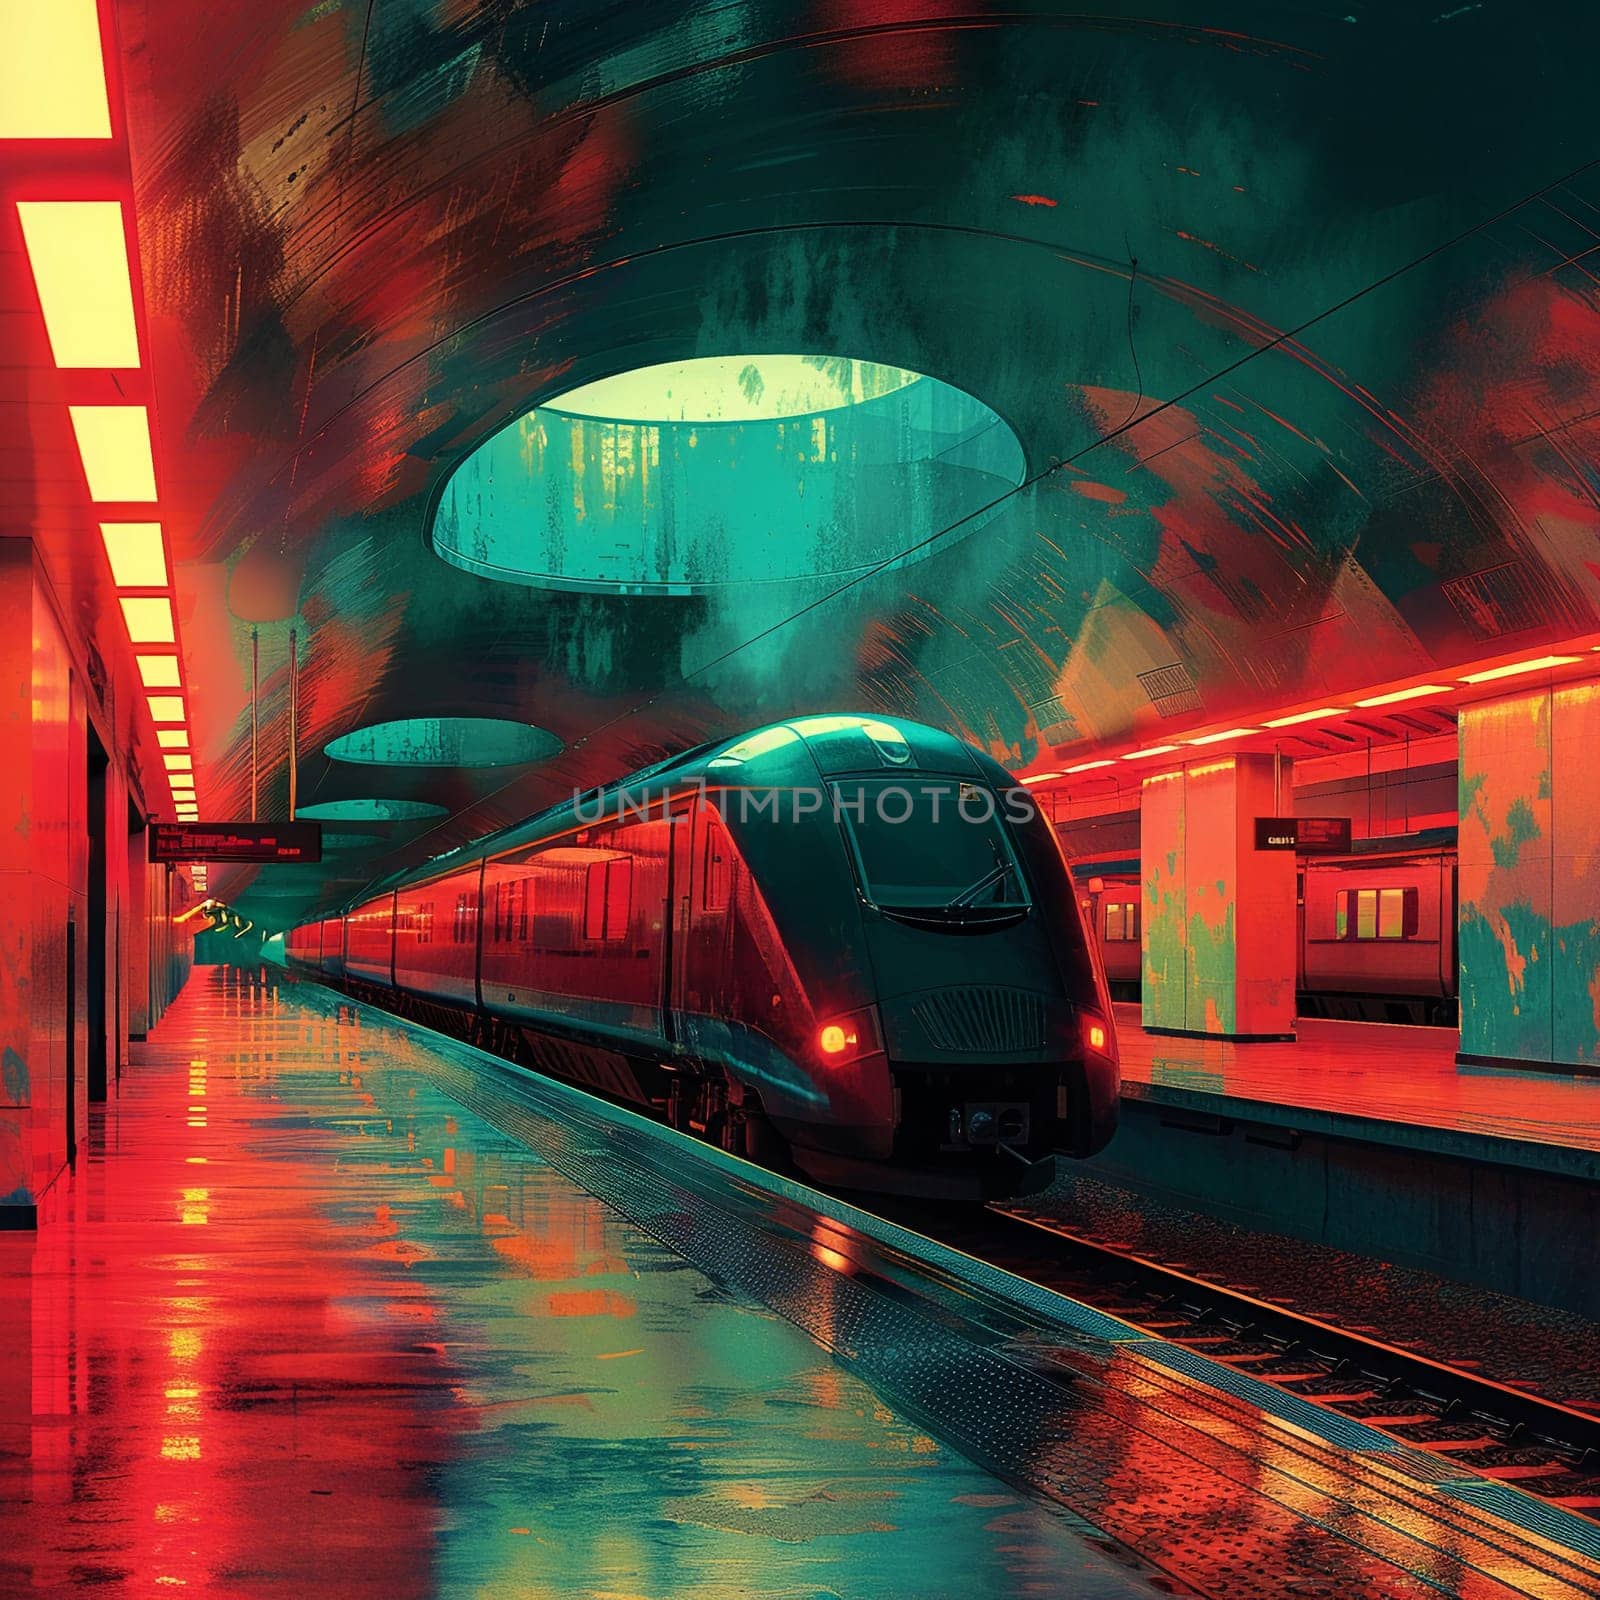 Futuristic train station arrival illustrated with sharp geometric shapes and a cool by Benzoix